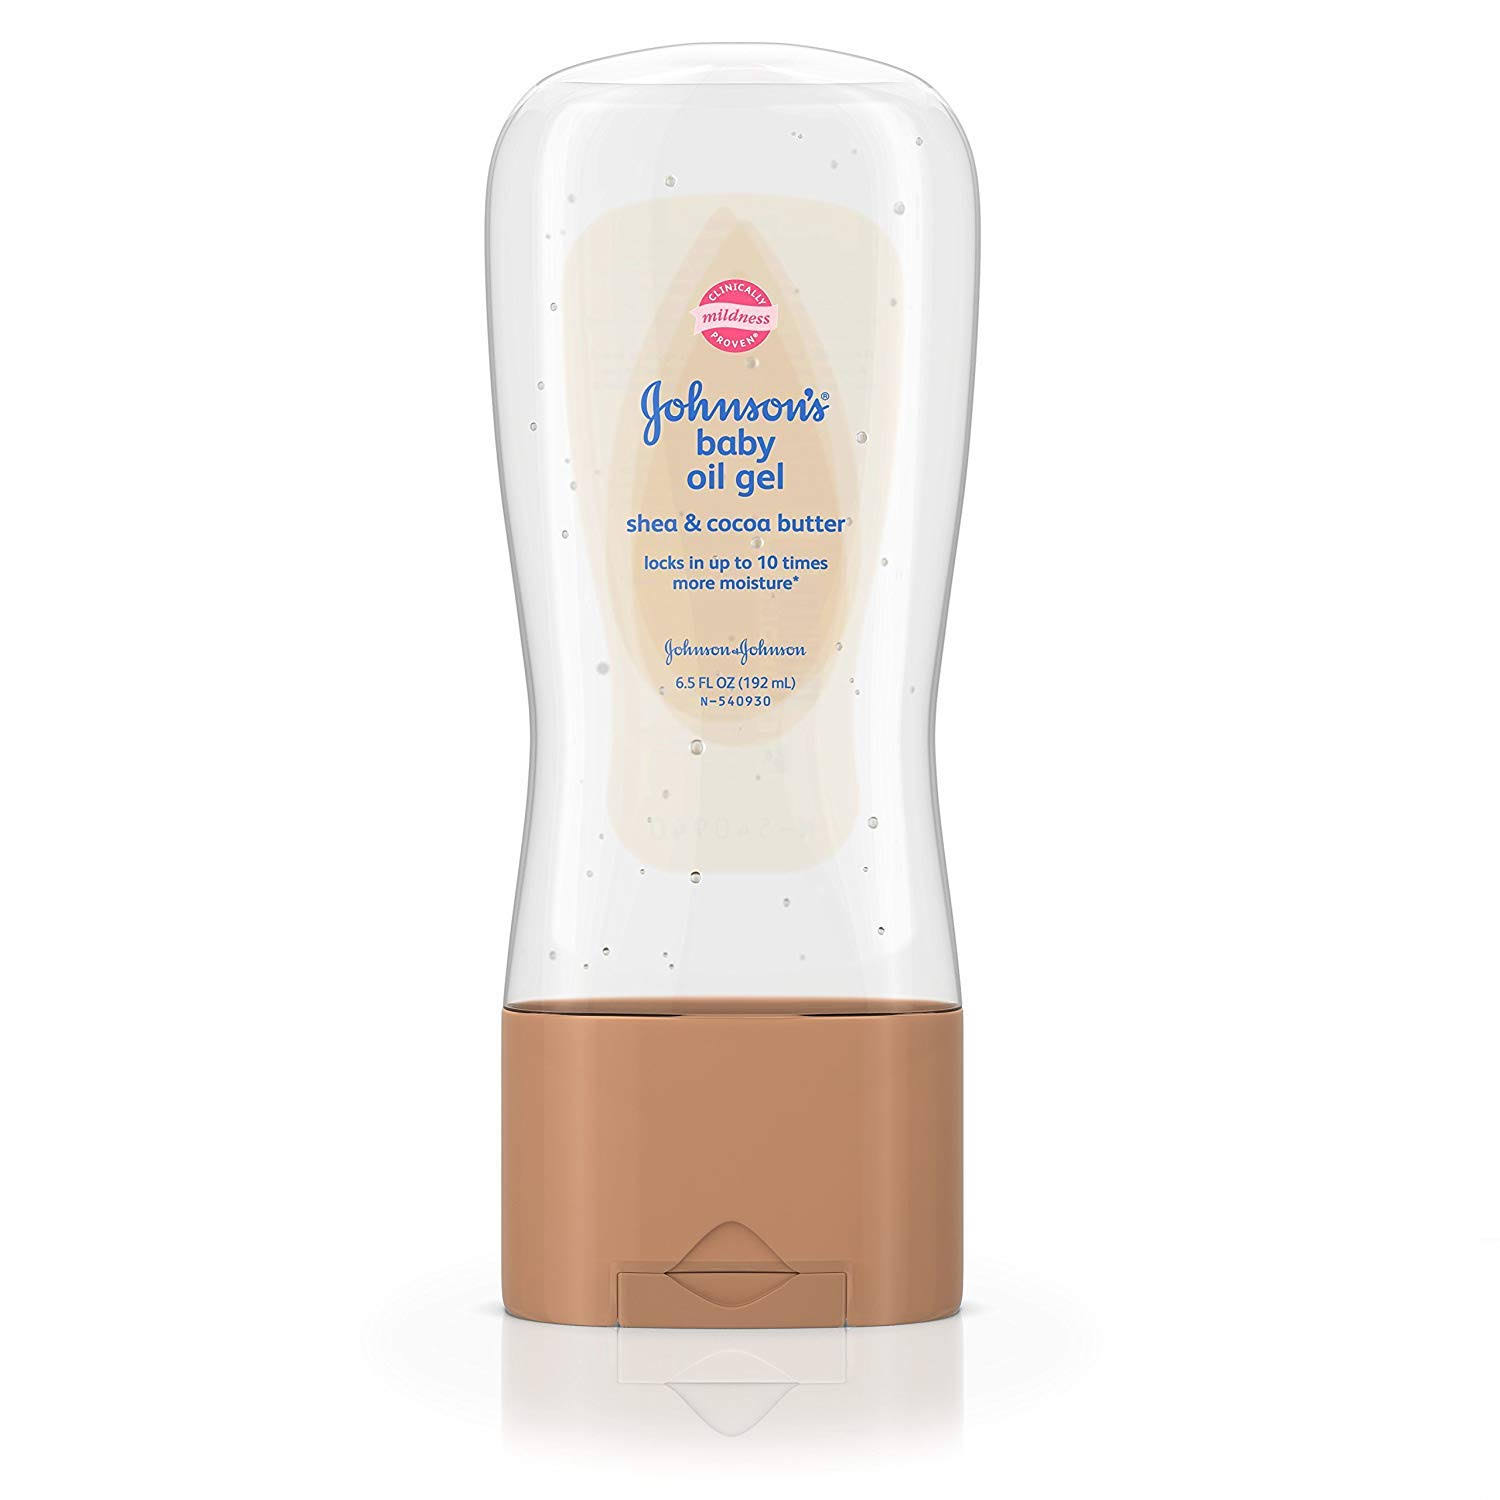 Johnson's Baby Oil Gel - Shea and Cocoa Butter, 6.5oz